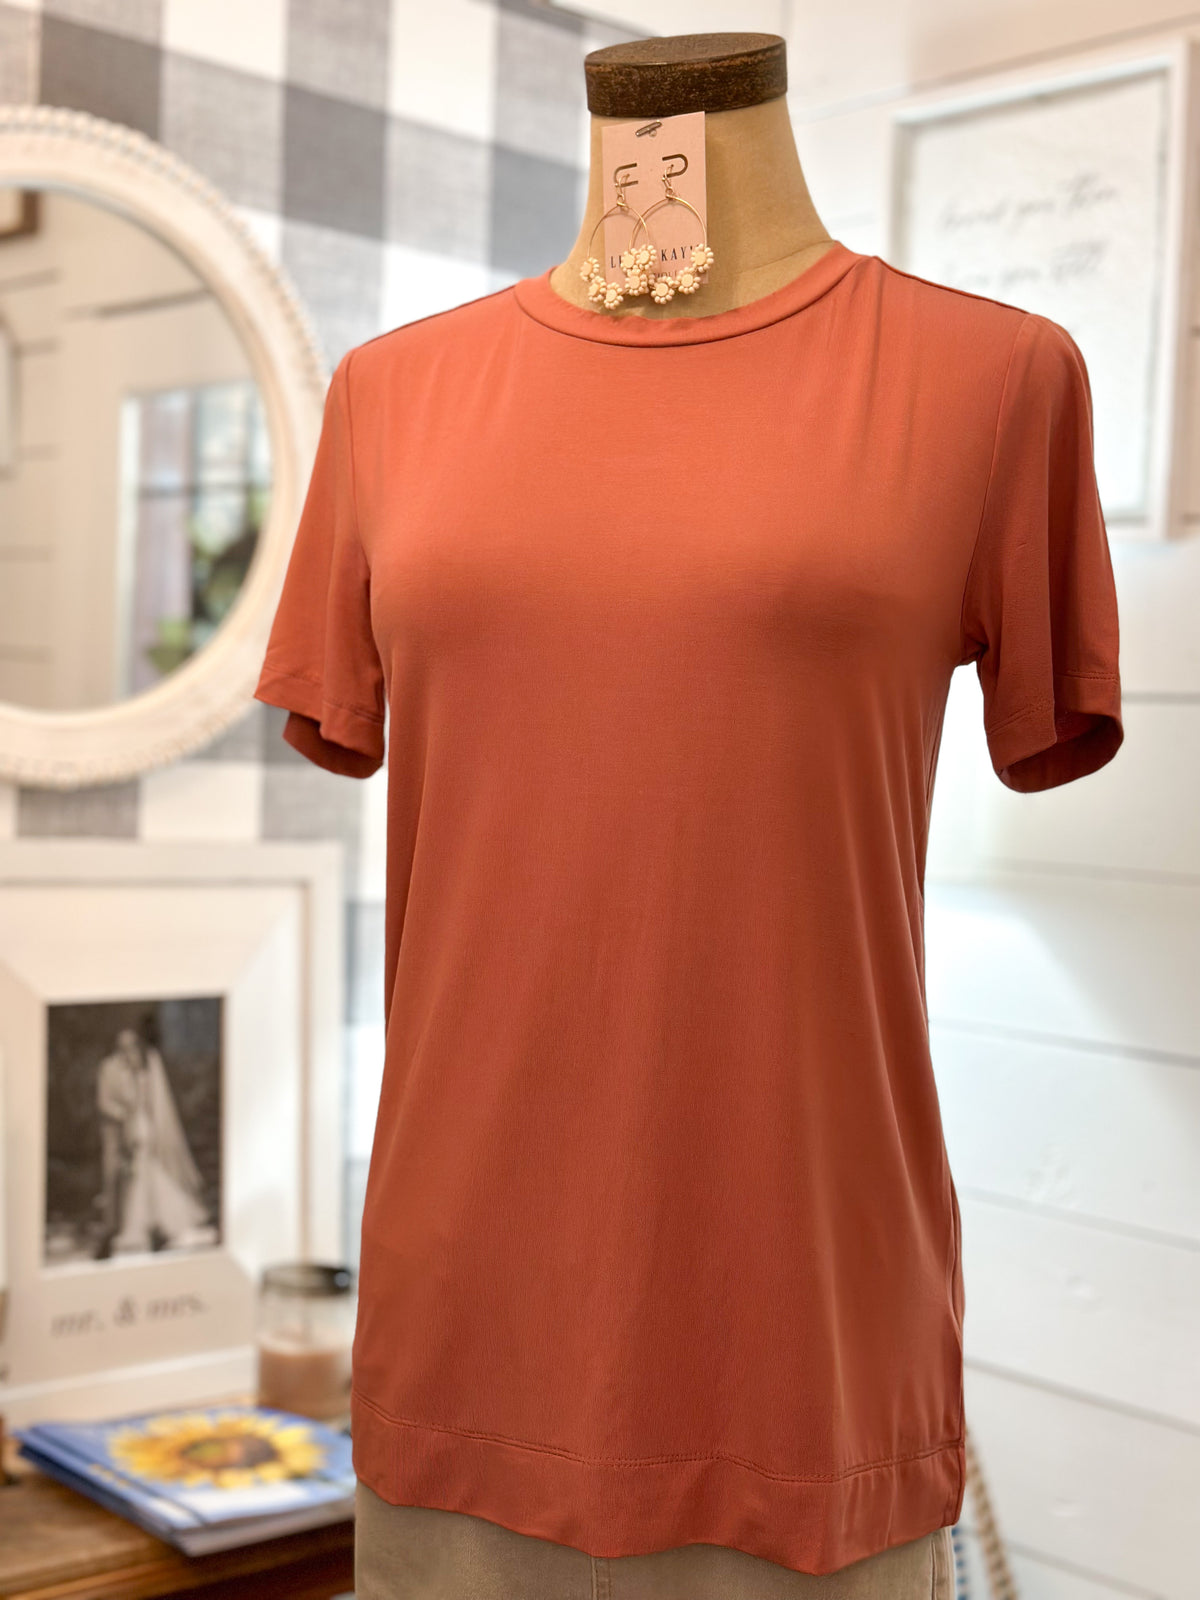 terra cotta color short sleeve top with thick hem on the bottom of top